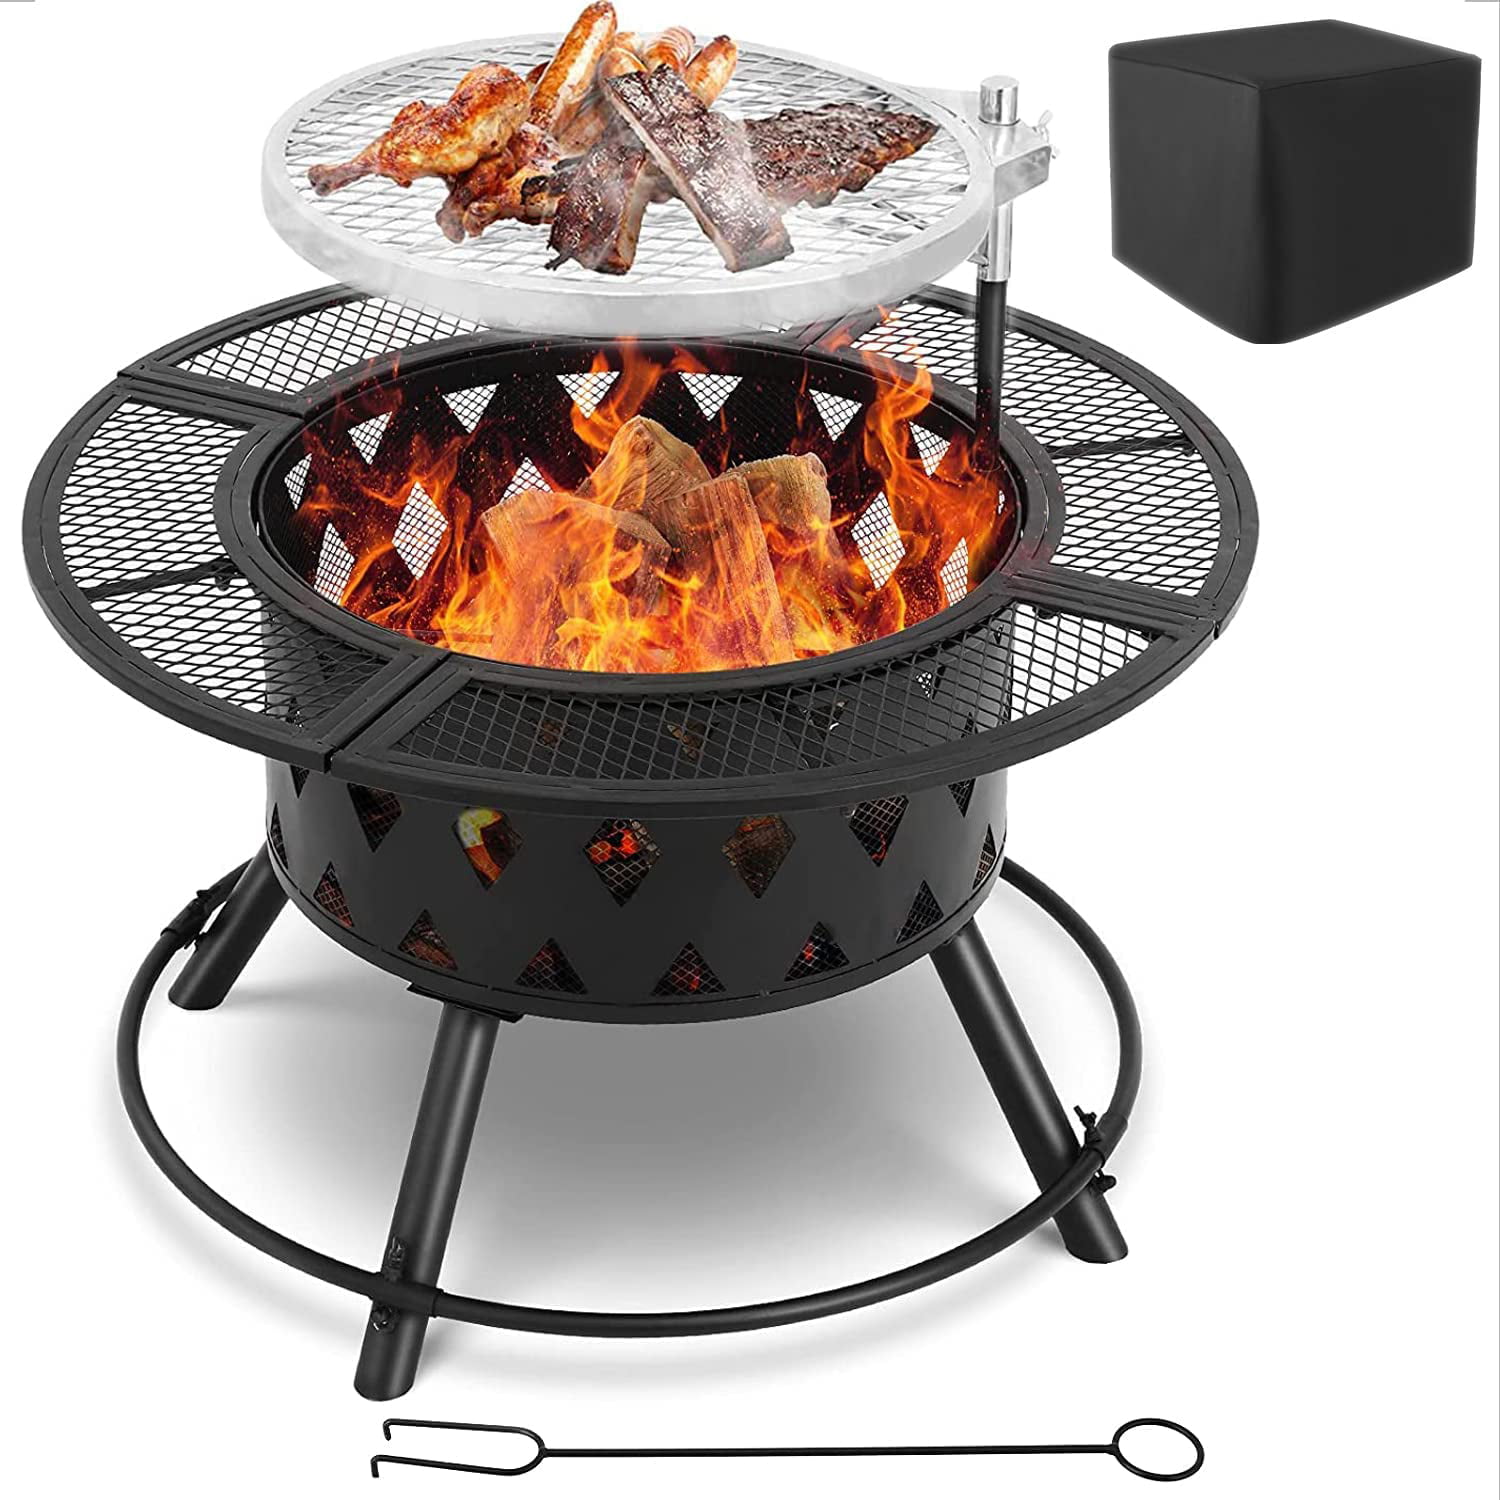 Cooking Grate Wood Burning Firepit Bowl, Fire Pit Cooking Grate Cast Iron